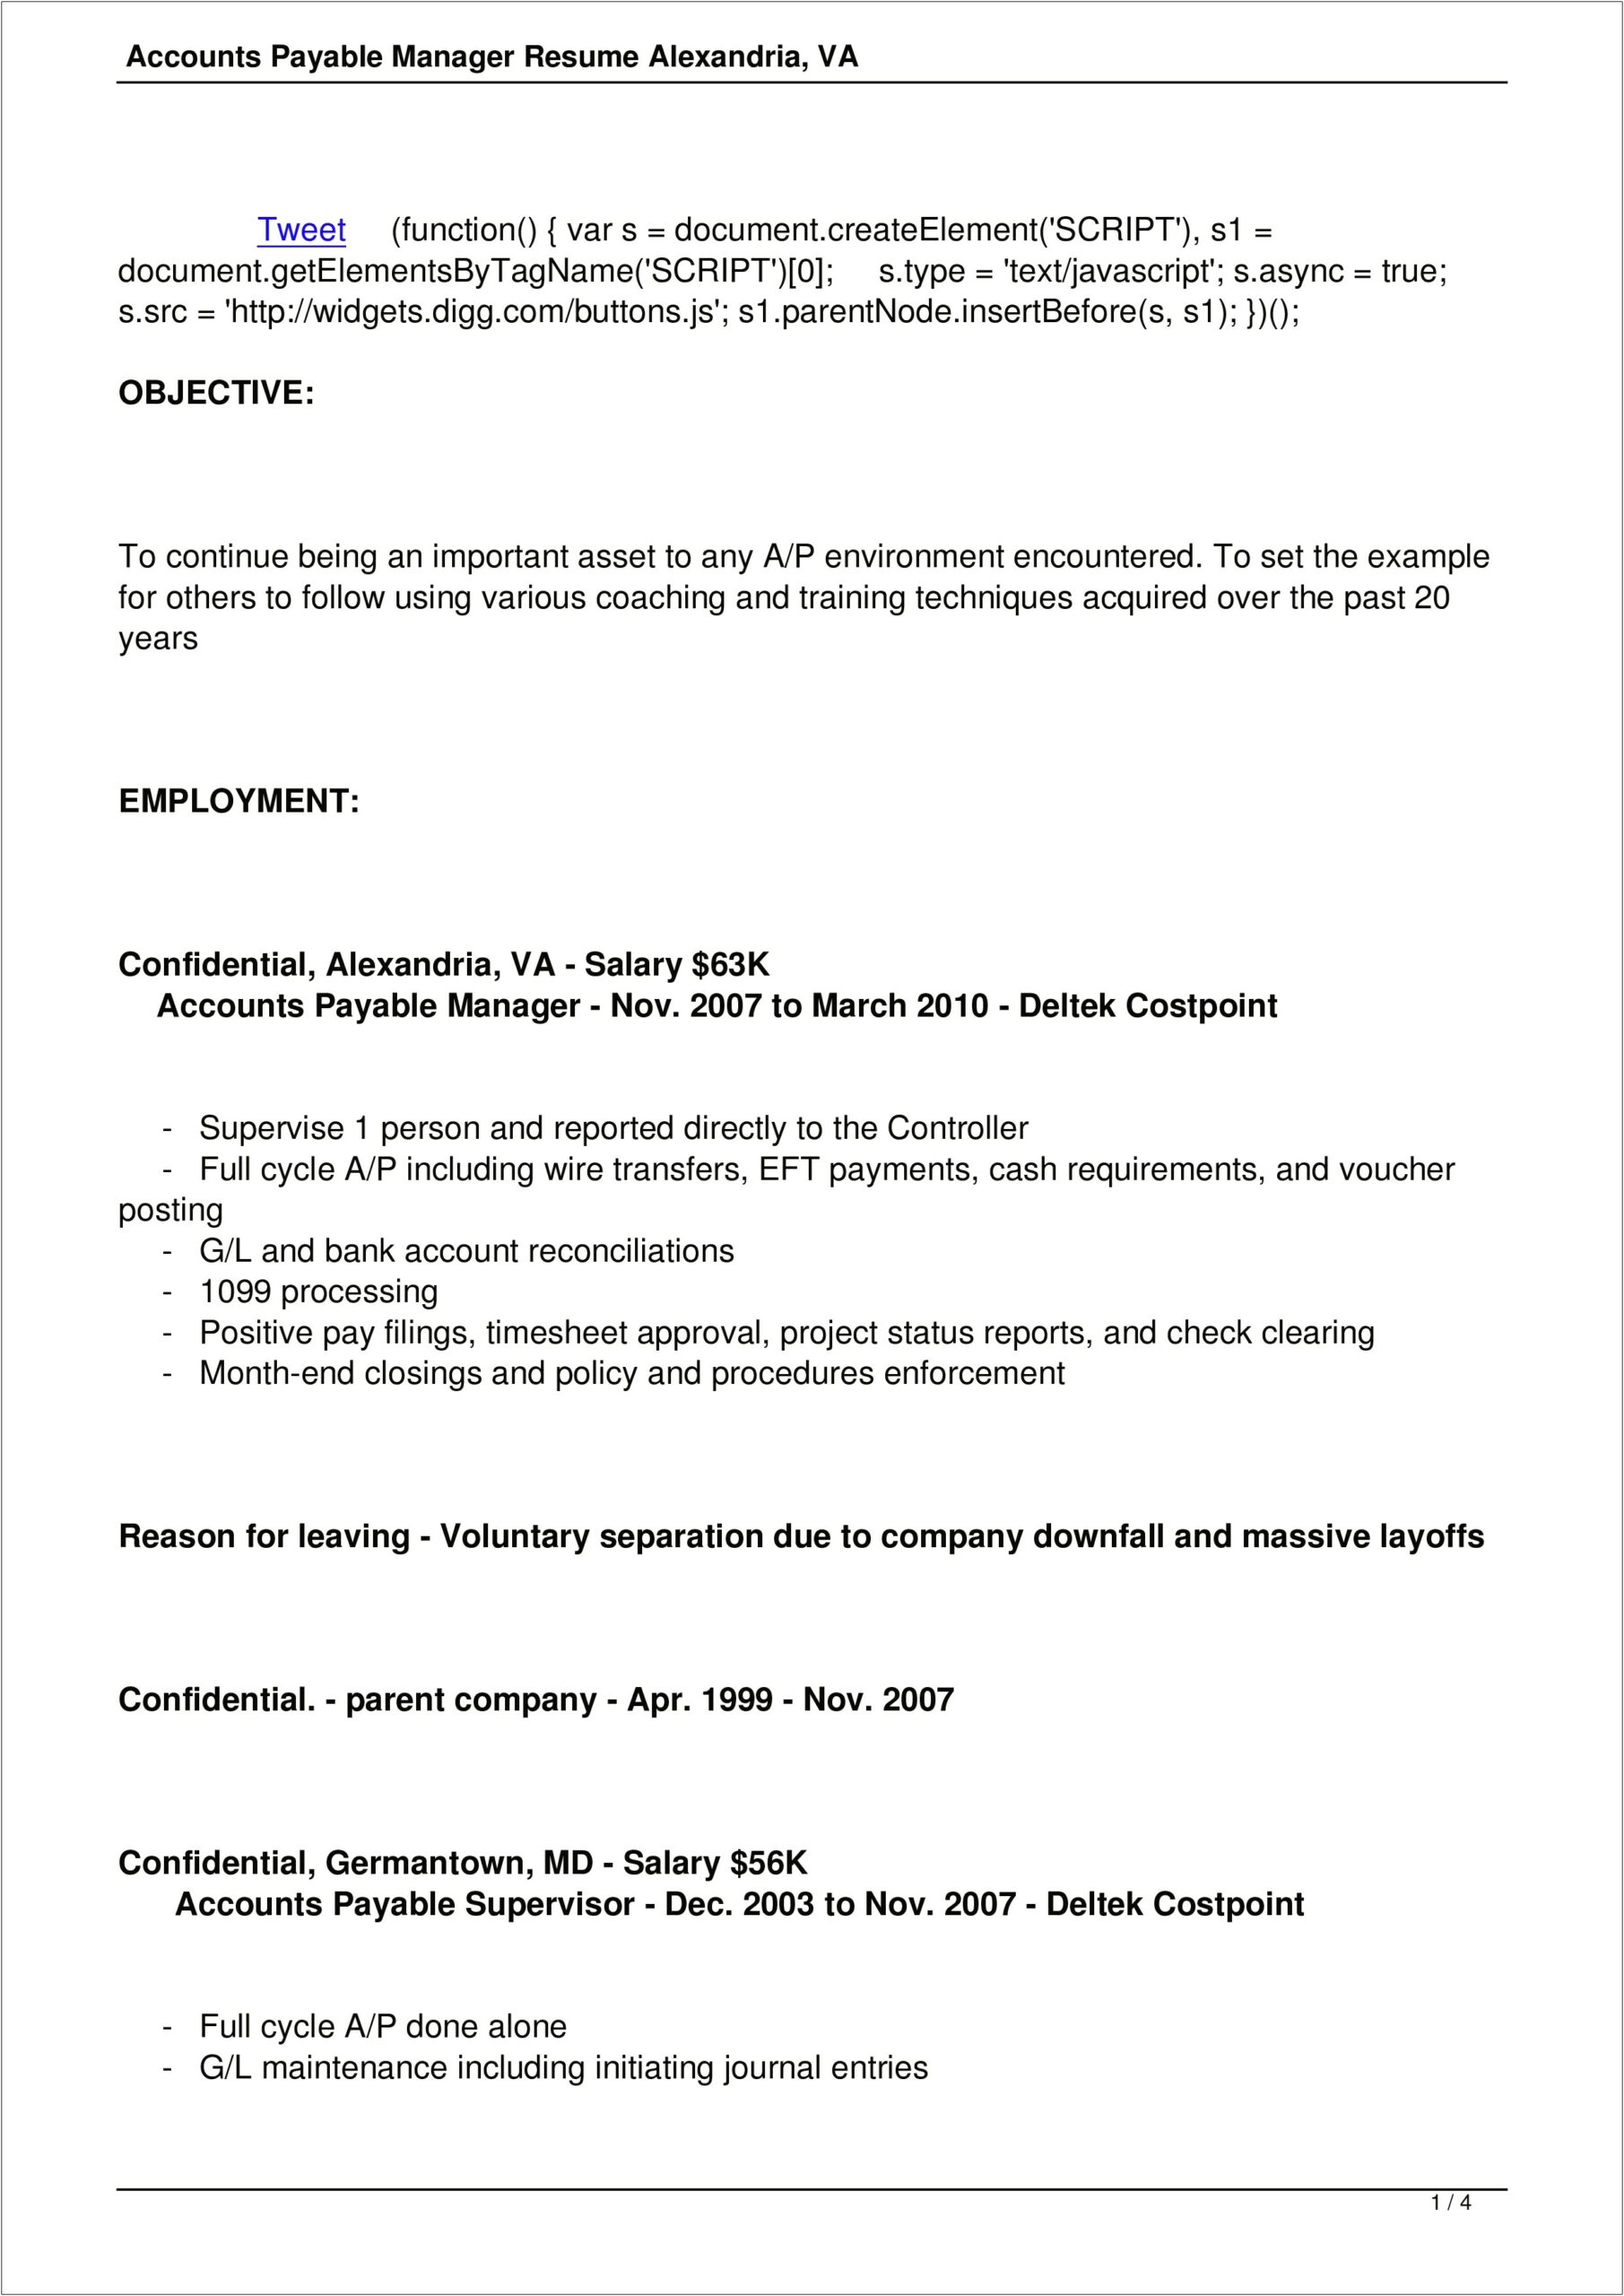 Accounts Payable Resume For 1 Year Experience